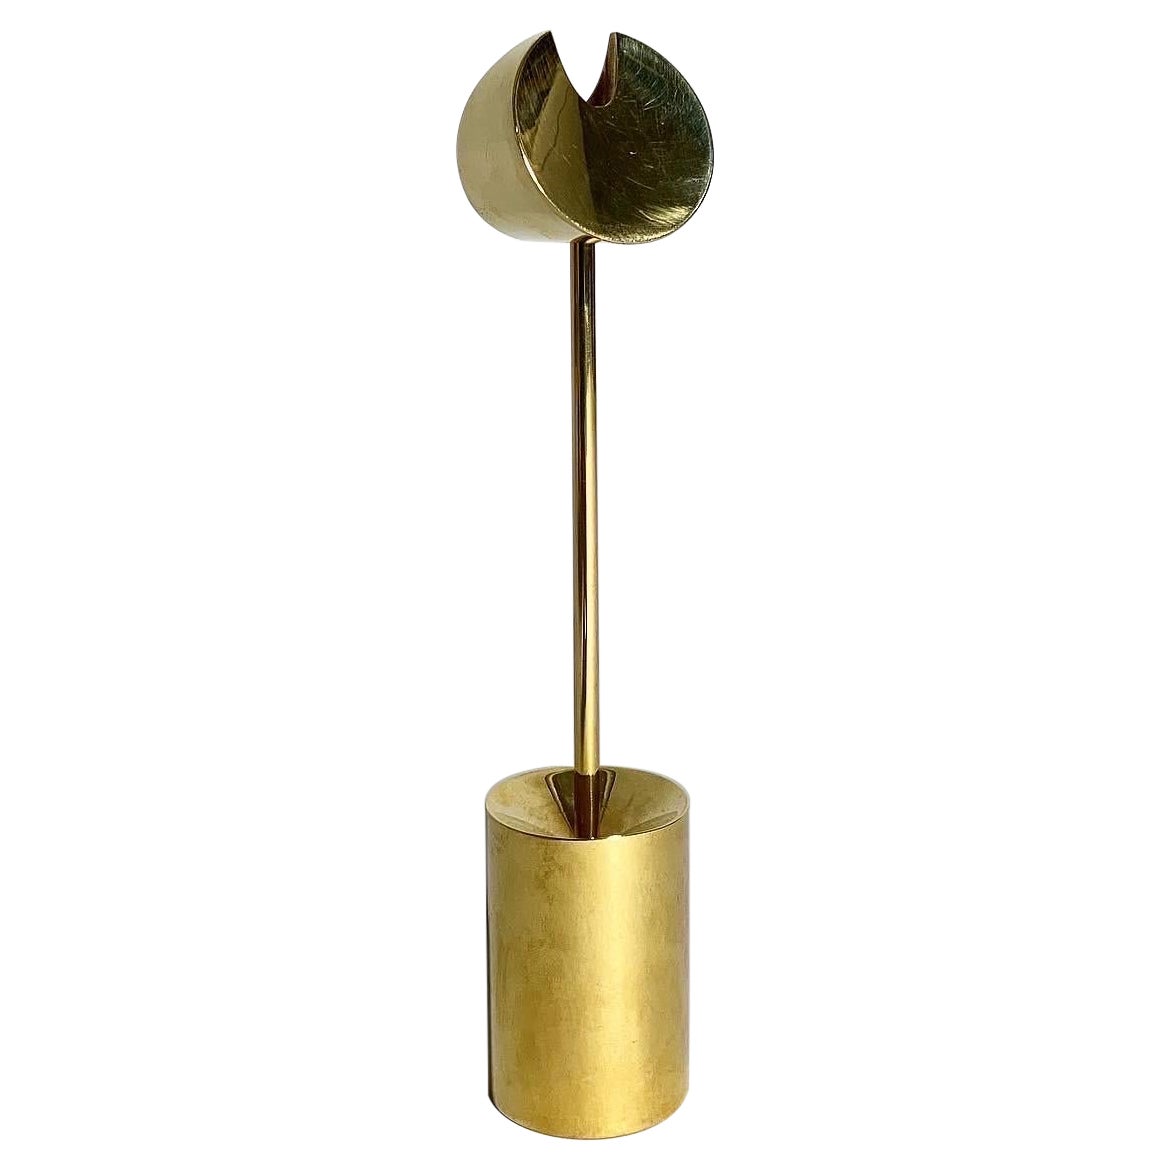 Pierre Forsell Aniara Candle Stick Holder Brass Skultuna, Sweden, 1960s